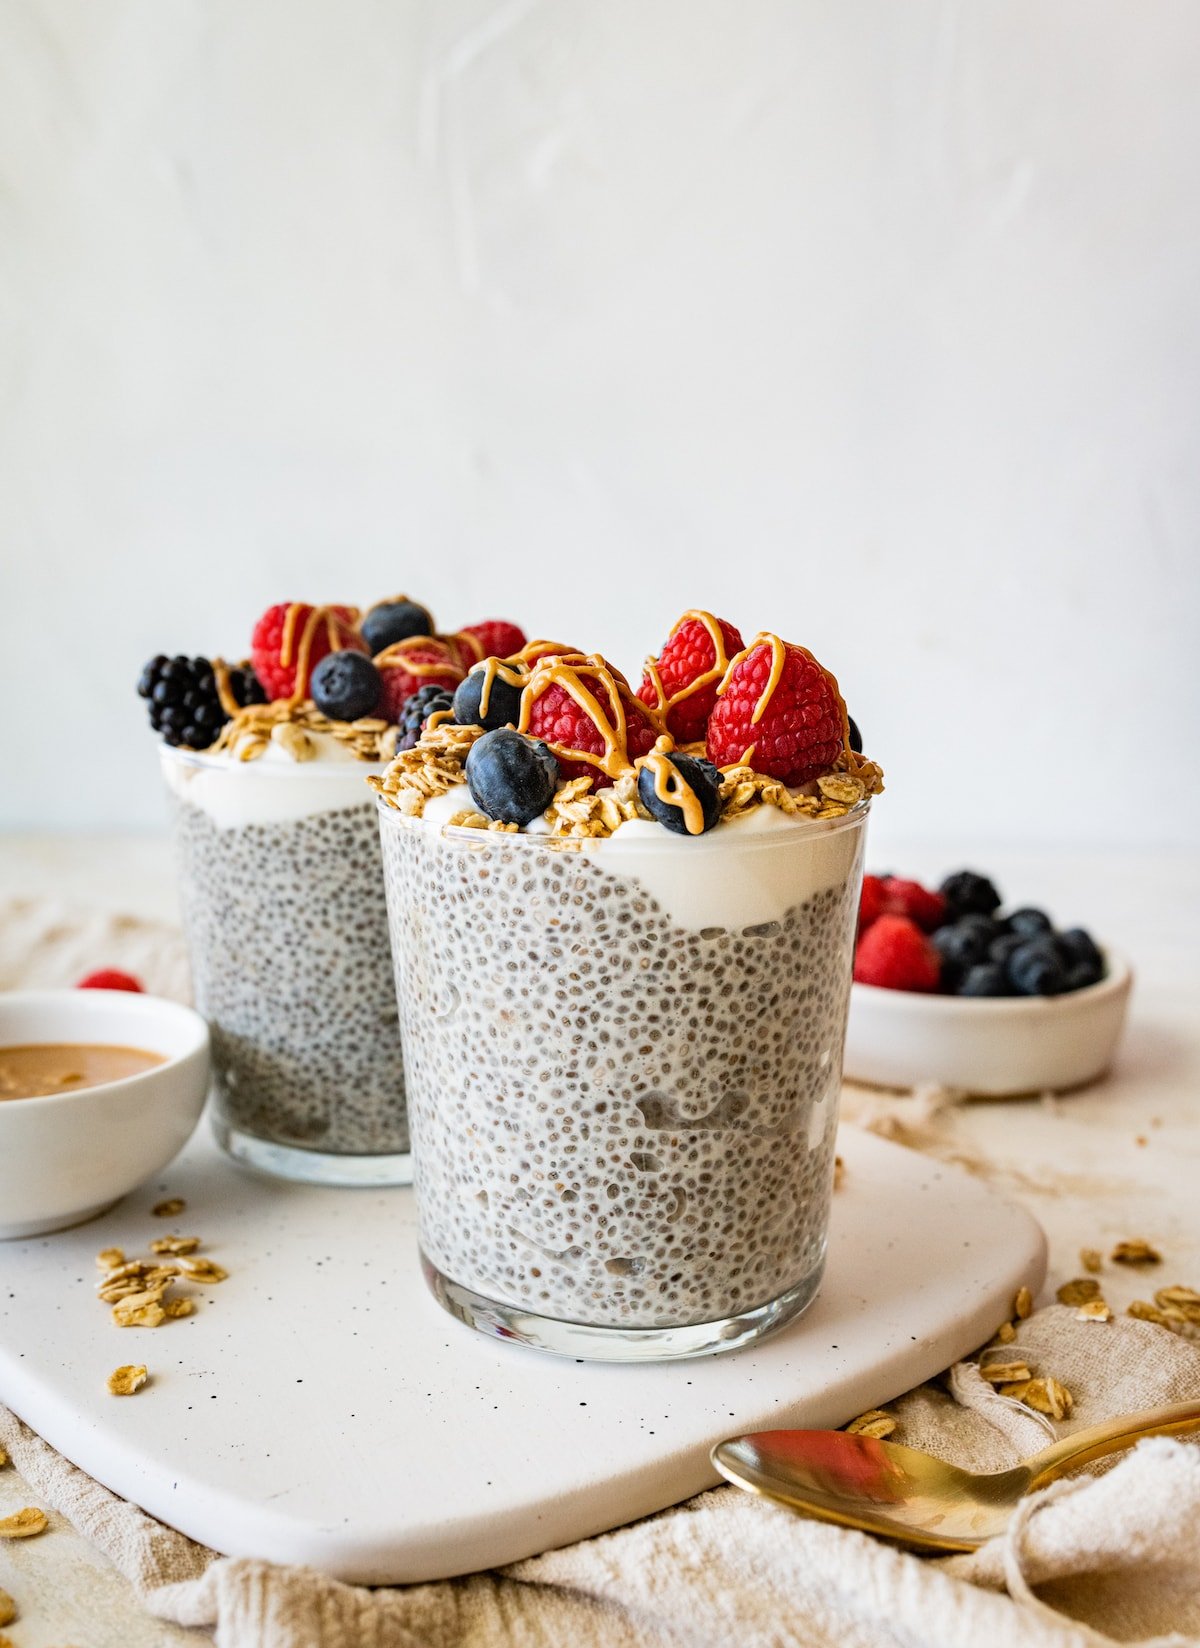 Two protein chia pudding jars topped with fresh raspberries, blueberries, blackberries, greek yogurt and a drizzle of nut butter.